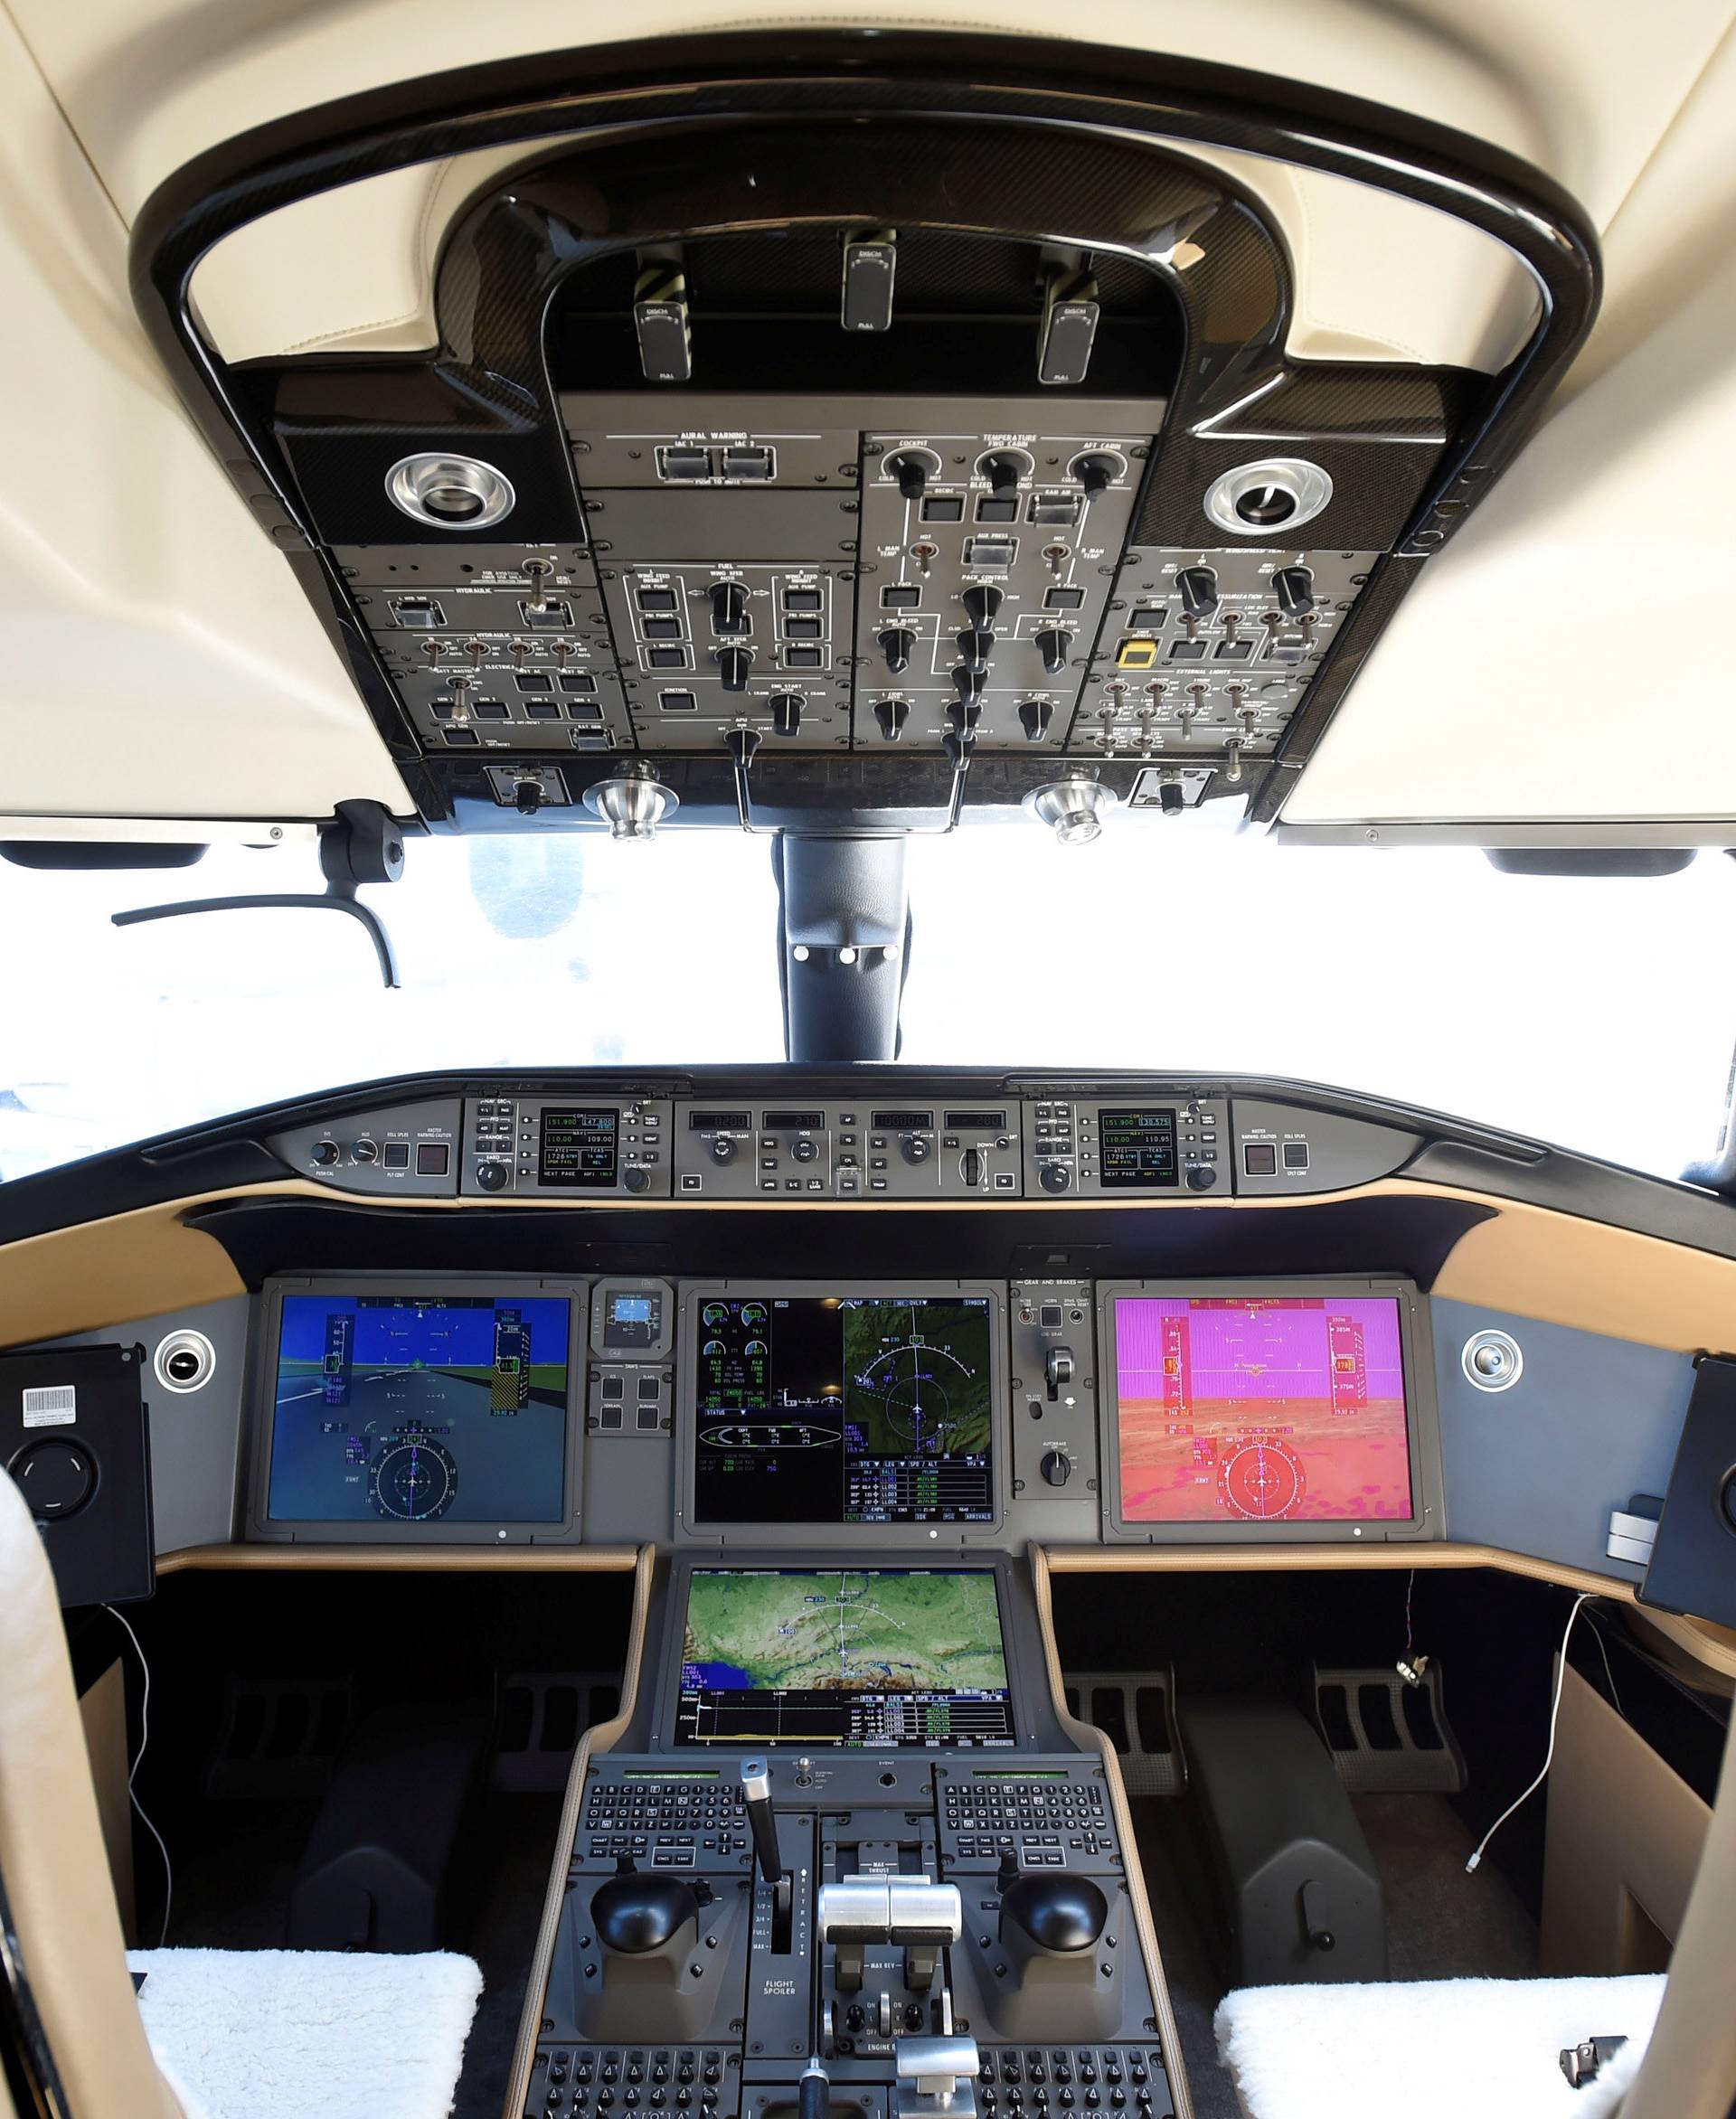 The cockpit of a mock-up Bombardier Global 7000 business jet is seen during the National Business Aviation Association at the Henderson Executive Airport in Henderson